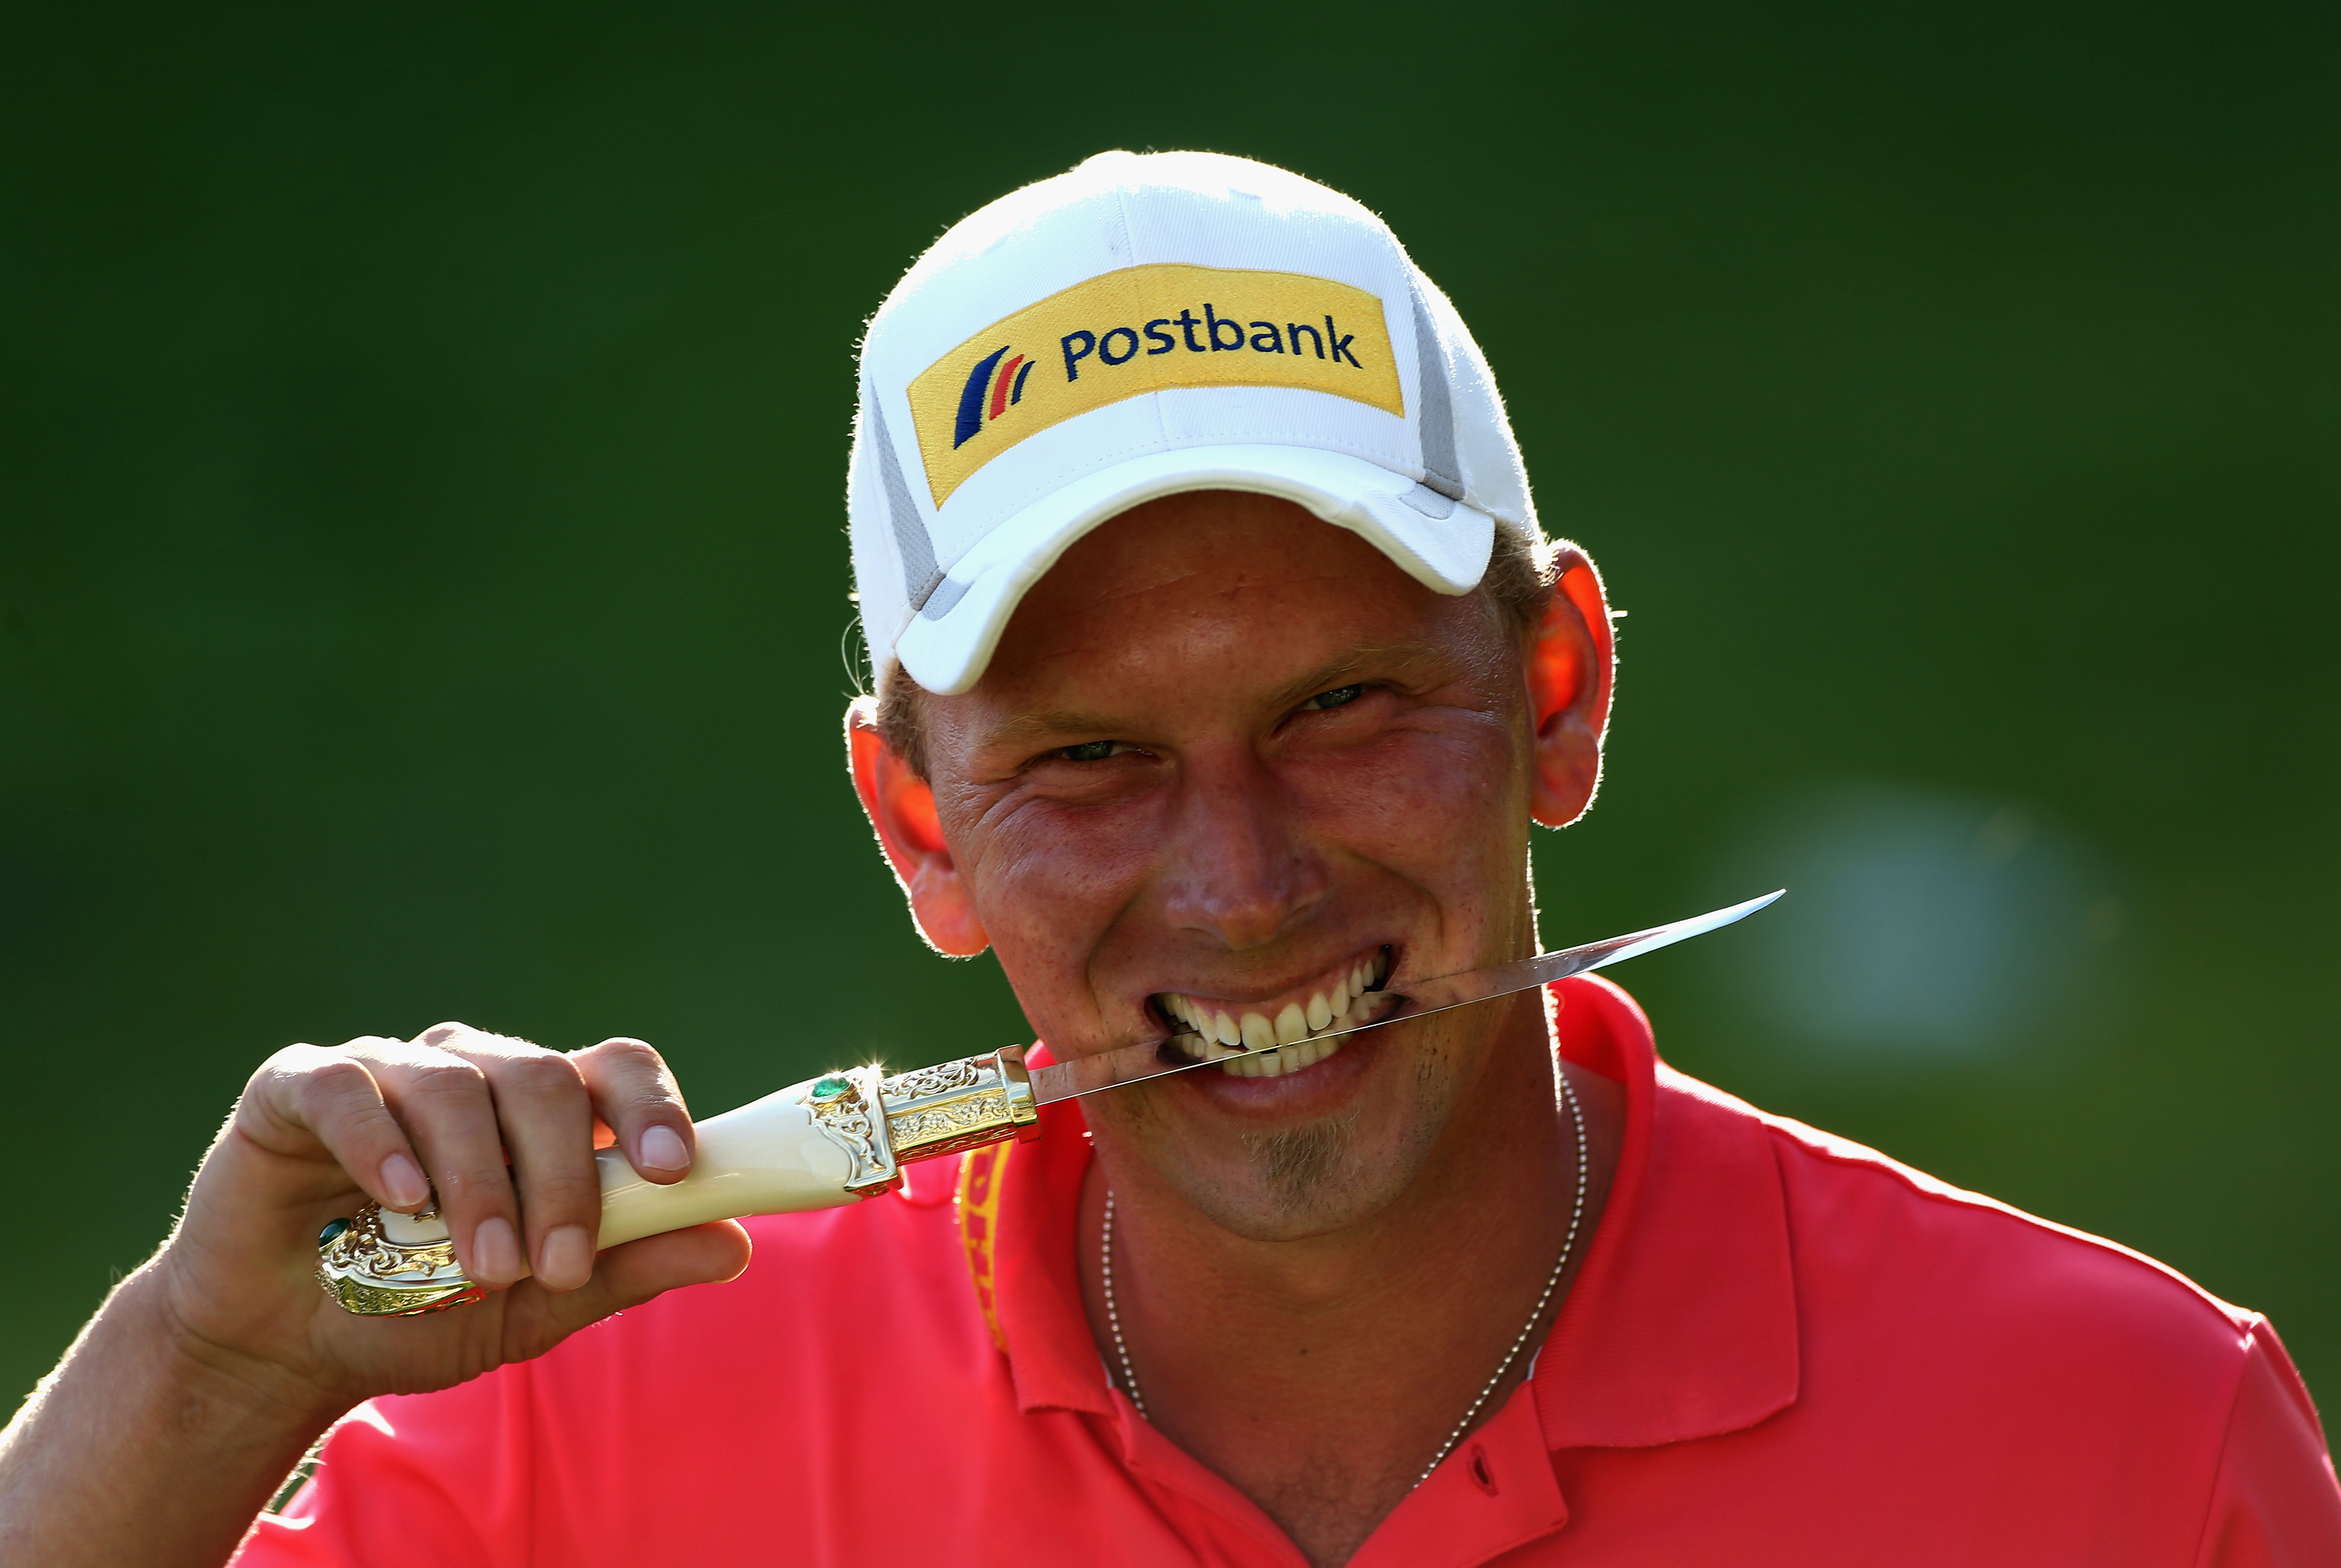 AGADIR, MOROCCO - MARCH 31: Marcel Siem of Germany poses with the trophy dagger after winning the Trophee du Hassan II Golf on a score of -17 under par at Golf du Palais Royal on March 31, 2013 in Agadir, Morocco. (Photo by Warren Little/Getty Images) ORG XMIT: 157993387 ORIG FILE ID: 165122545